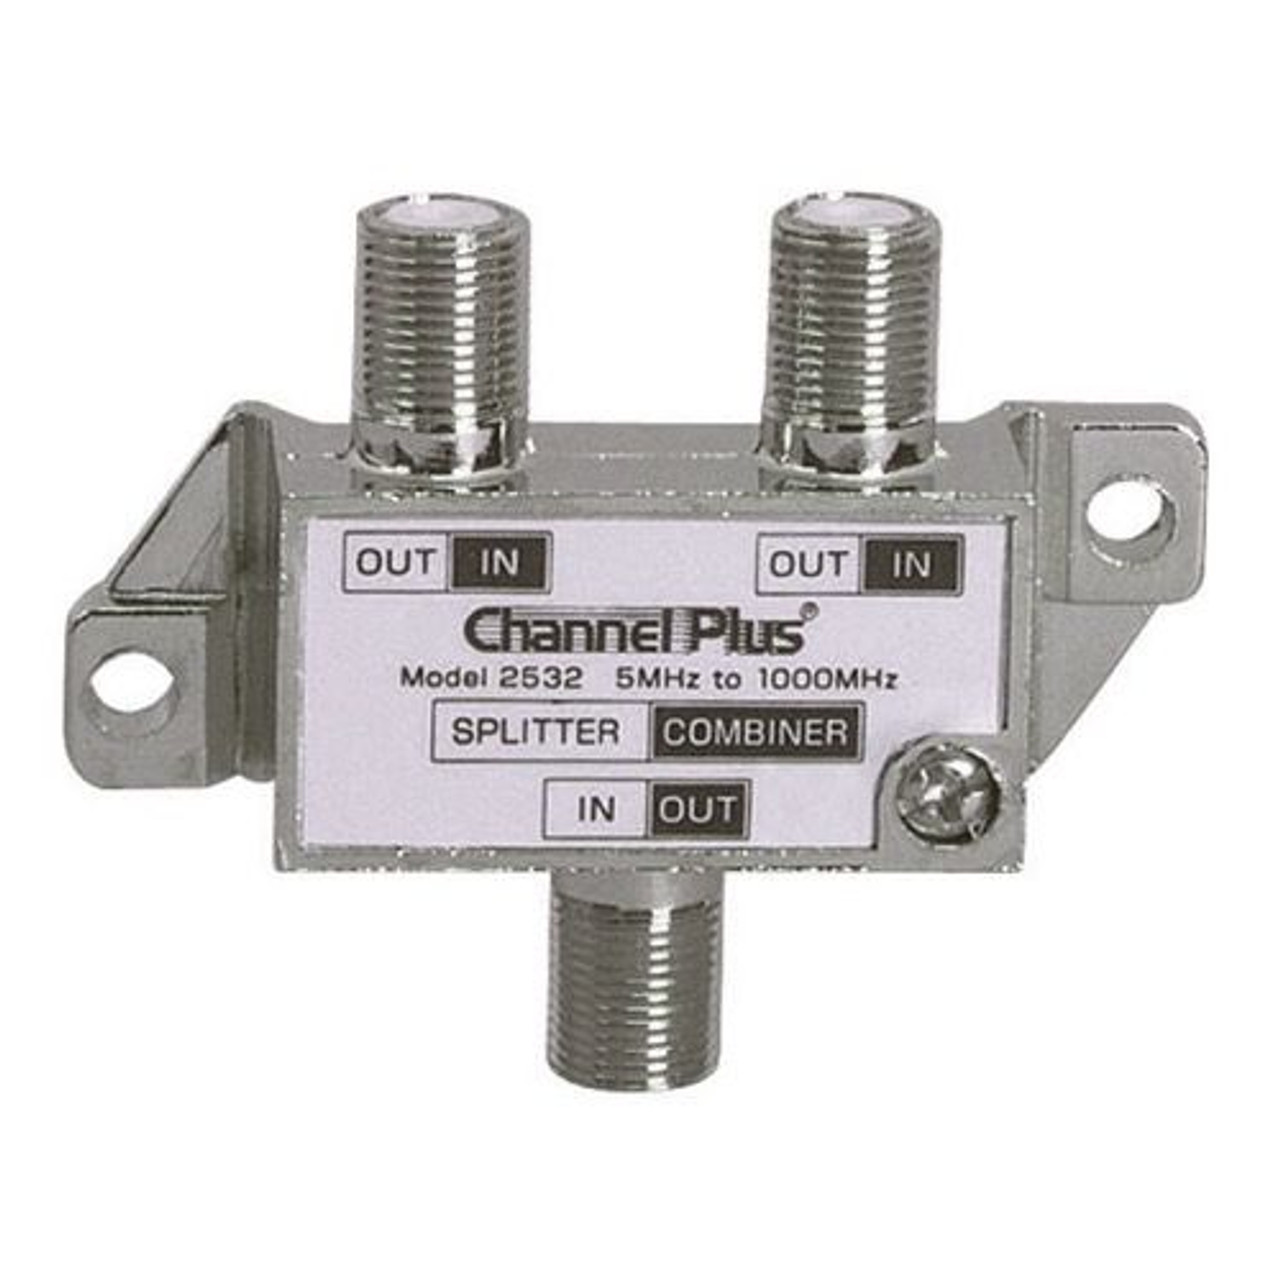 Channel Plus CP-2532 Diplexer 2 Way Signal Splitter Combiner 1 GHz DC and IR Blocking Bi-Directional Video Coaxial Cable UHF / VHF HD TV Antenna Splitter Combiner